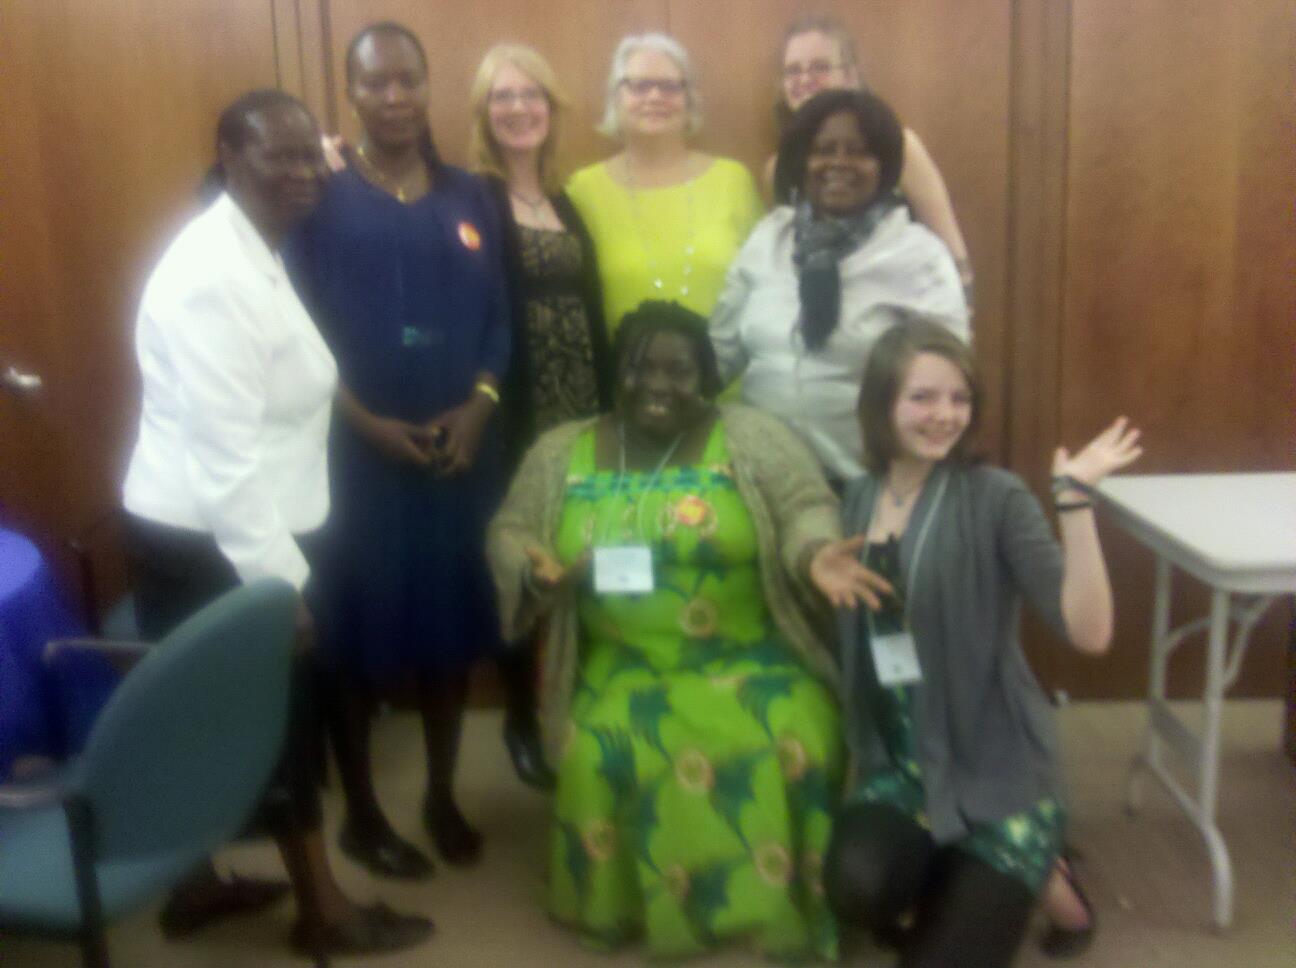 African Road team with United Nations delegates from Malawi, Southern Sudan, Ghana, and Zambia